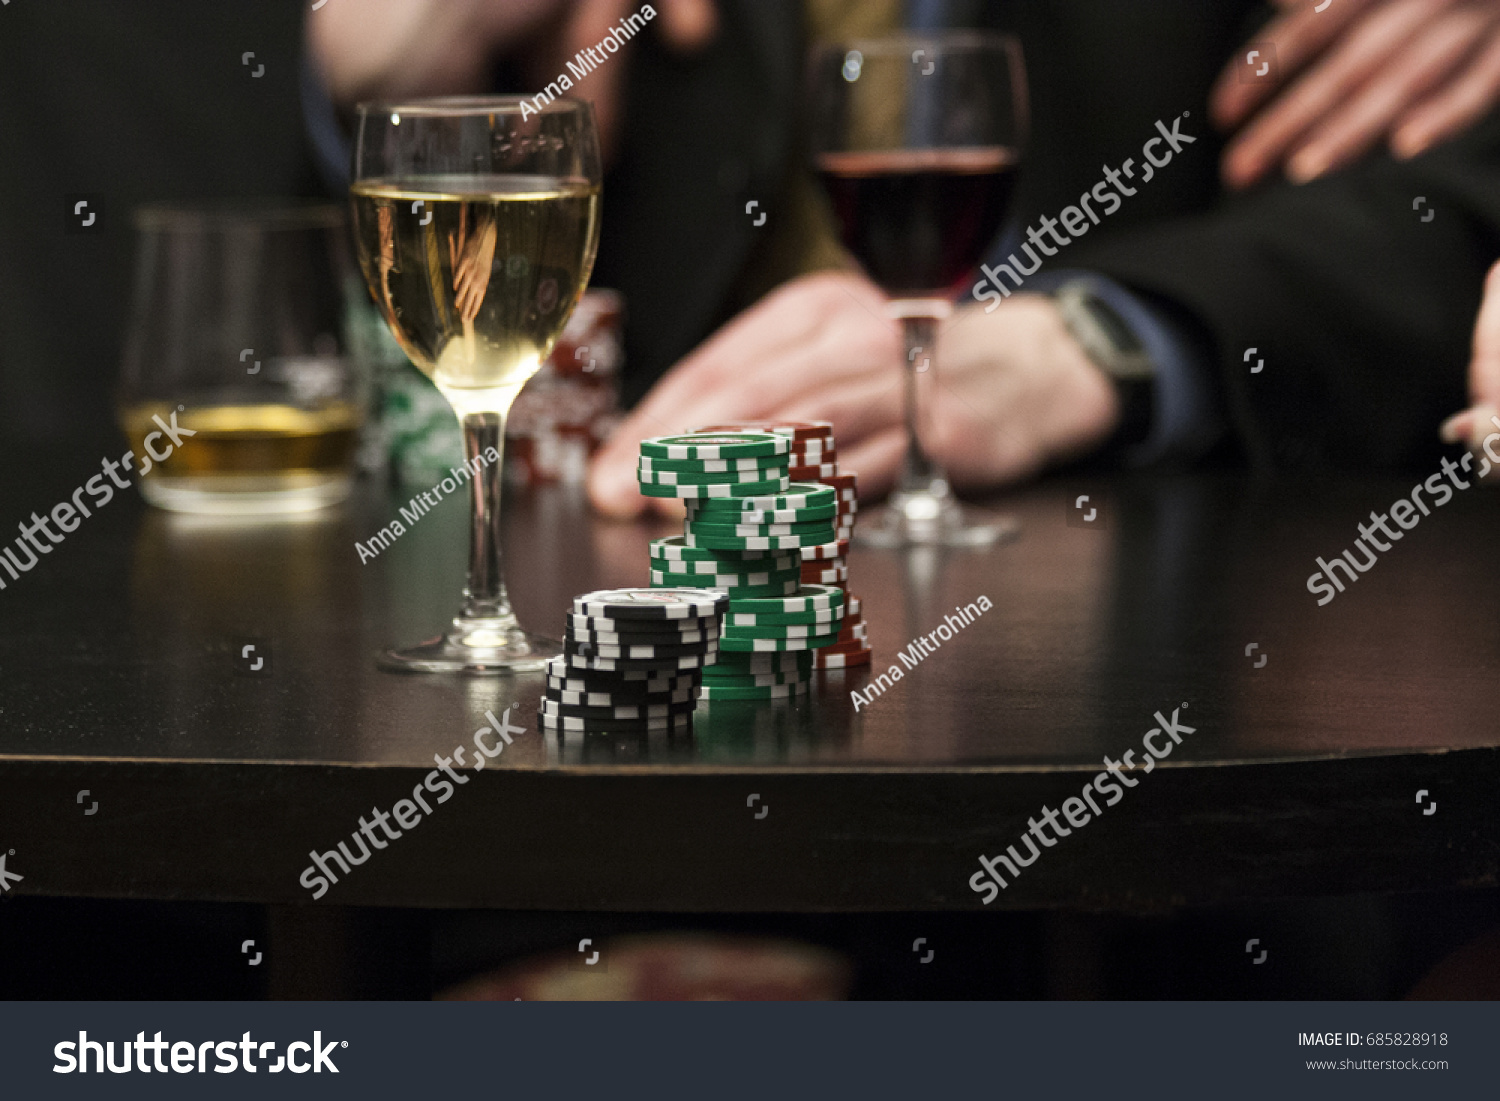 Poker chips on black table and red and white wine background #685828918